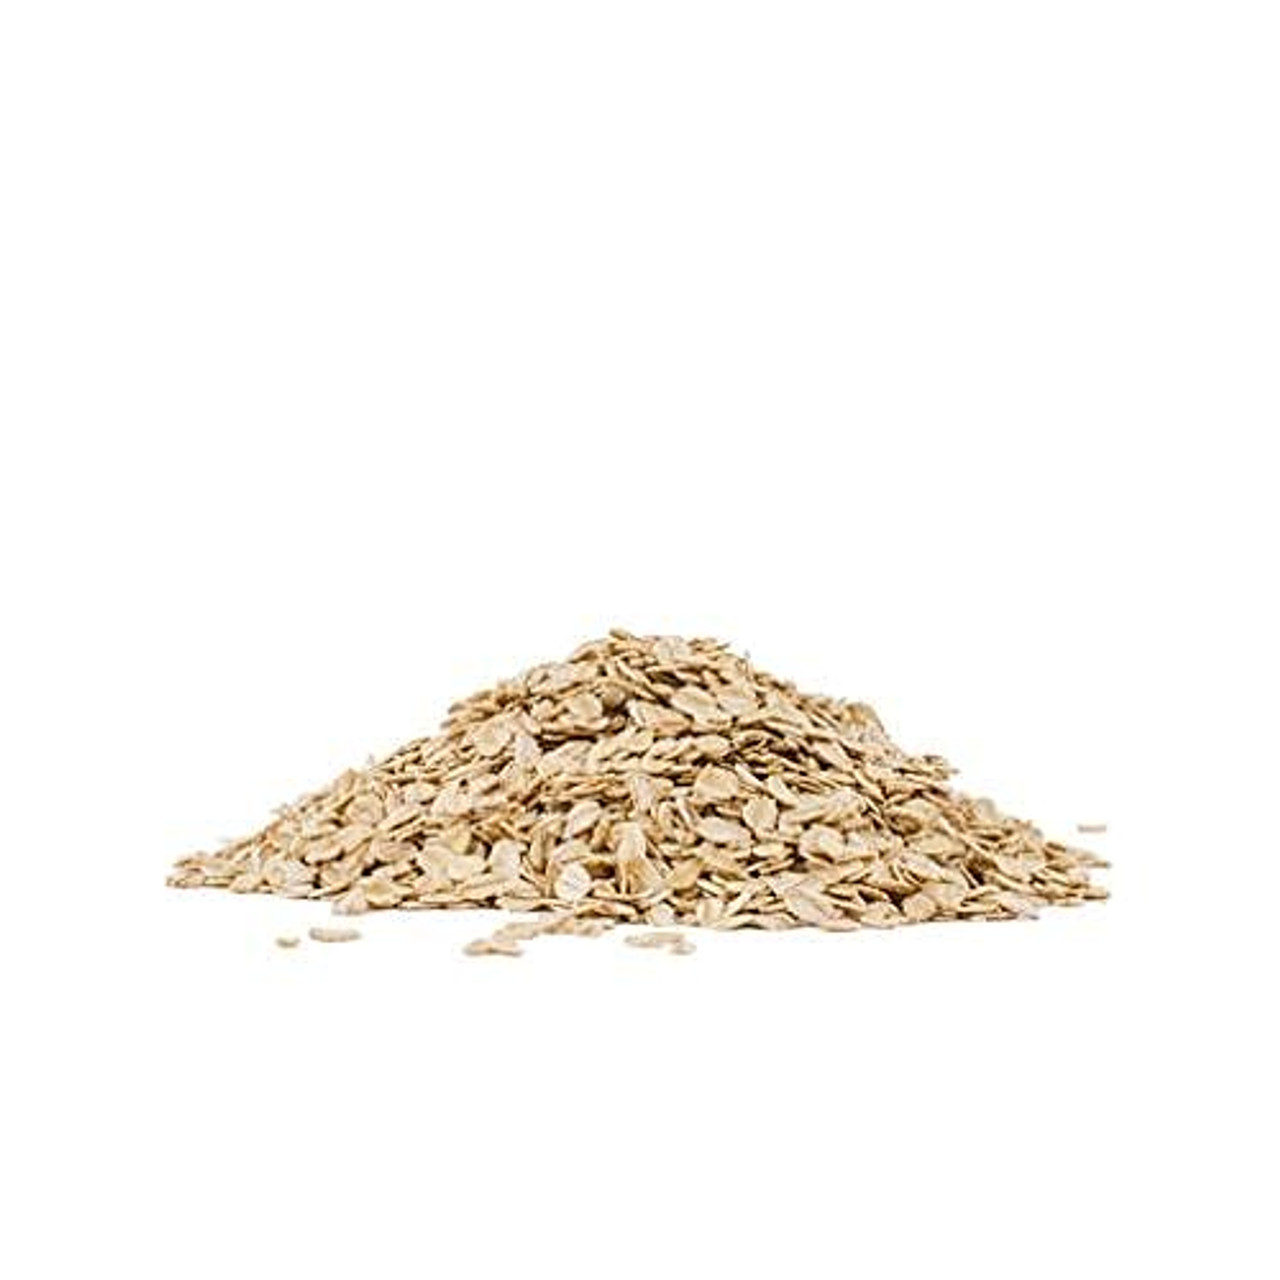 Bob's Red Mill 25 lb. (11.34 kg) Extra-Thick Whole Grain Rolled Oats - Chewy - Chicken Pieces